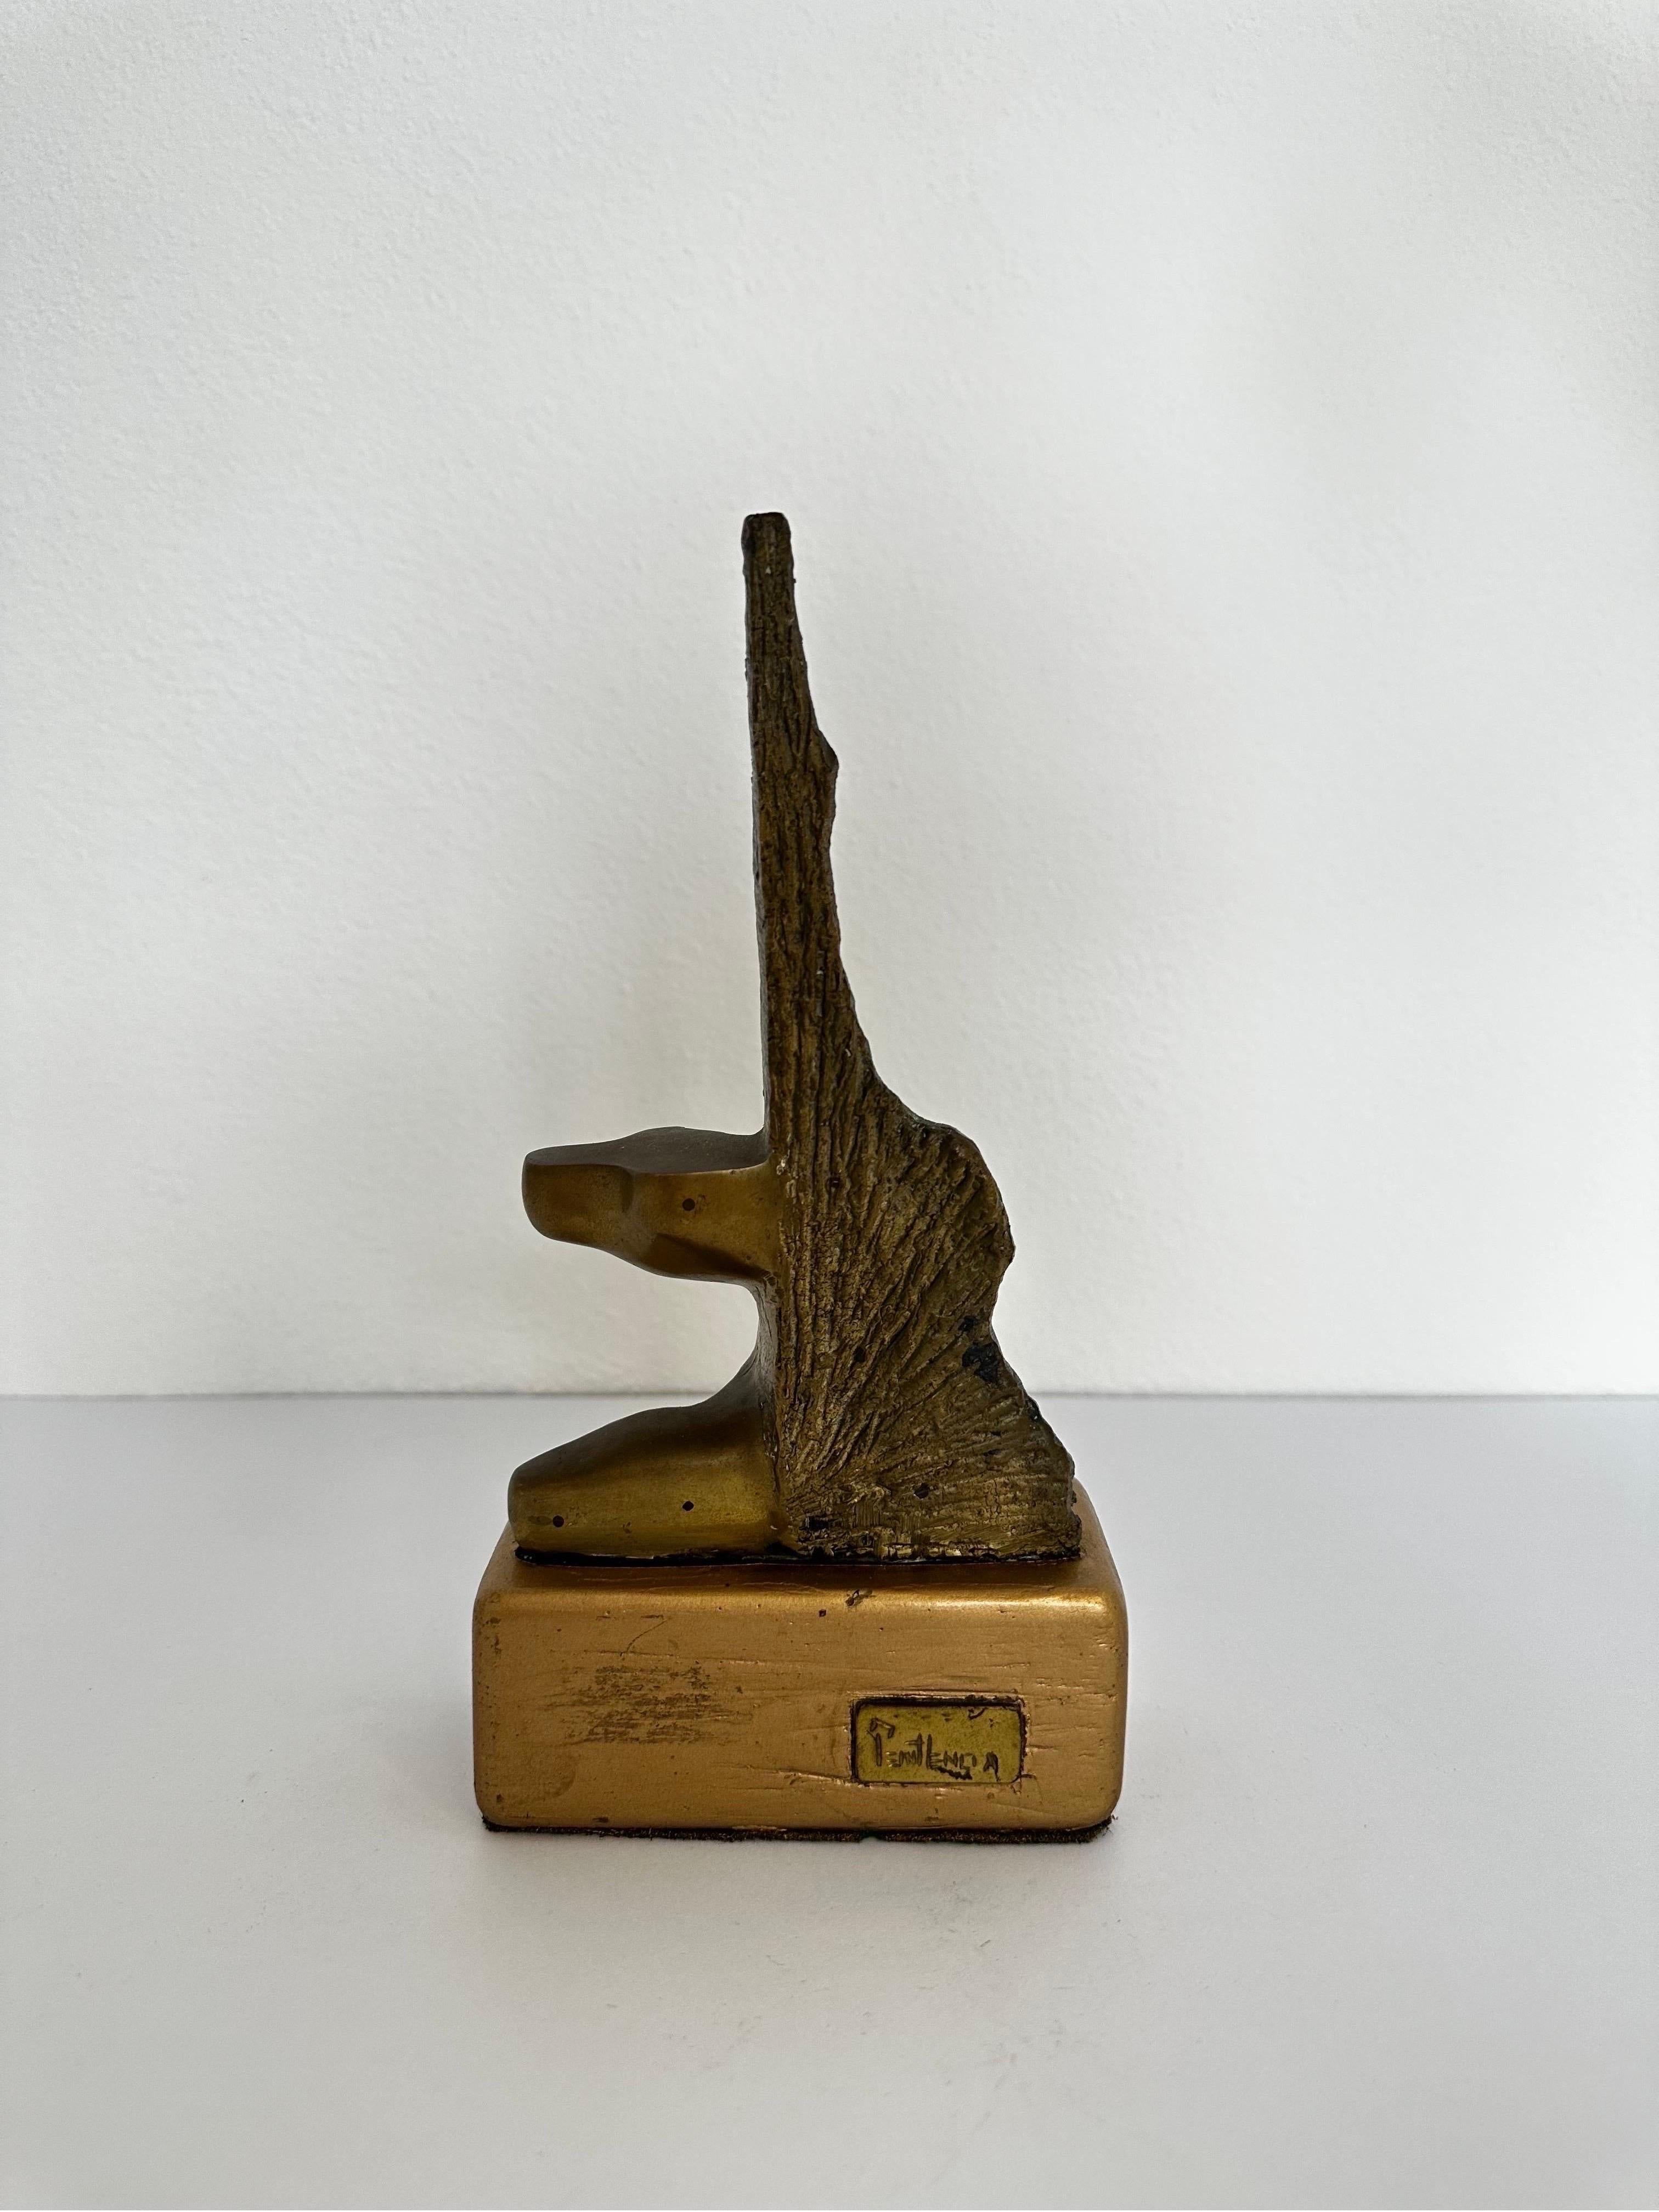 Sculpted by Brazilian plastics artist Penithencia, this unique brutalist abstract bronze sculpture sits a top a bronze painted wood base.  Signed and numbered 2/9 on bronze and maintains plaque on base.